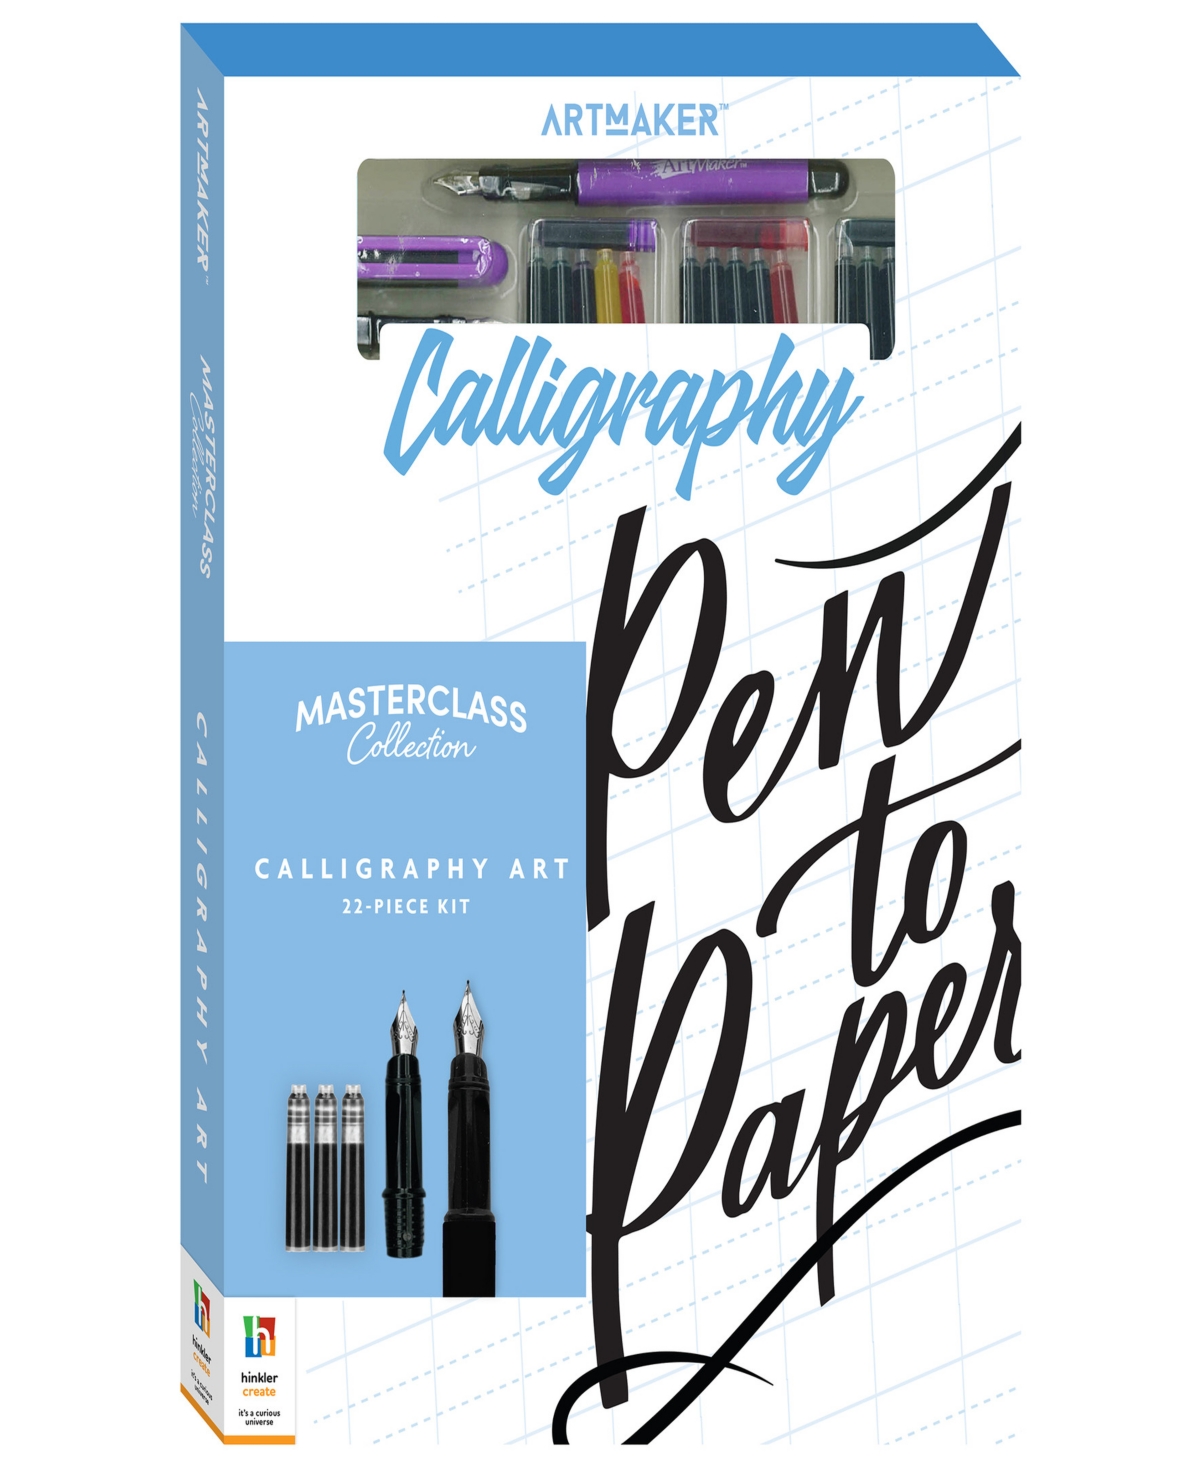 Art Maker Kids' Master Class Collection Calligraphy Art Kit Beginner To Advanced Calligraphy Calligraphy Guide Calli In Multi